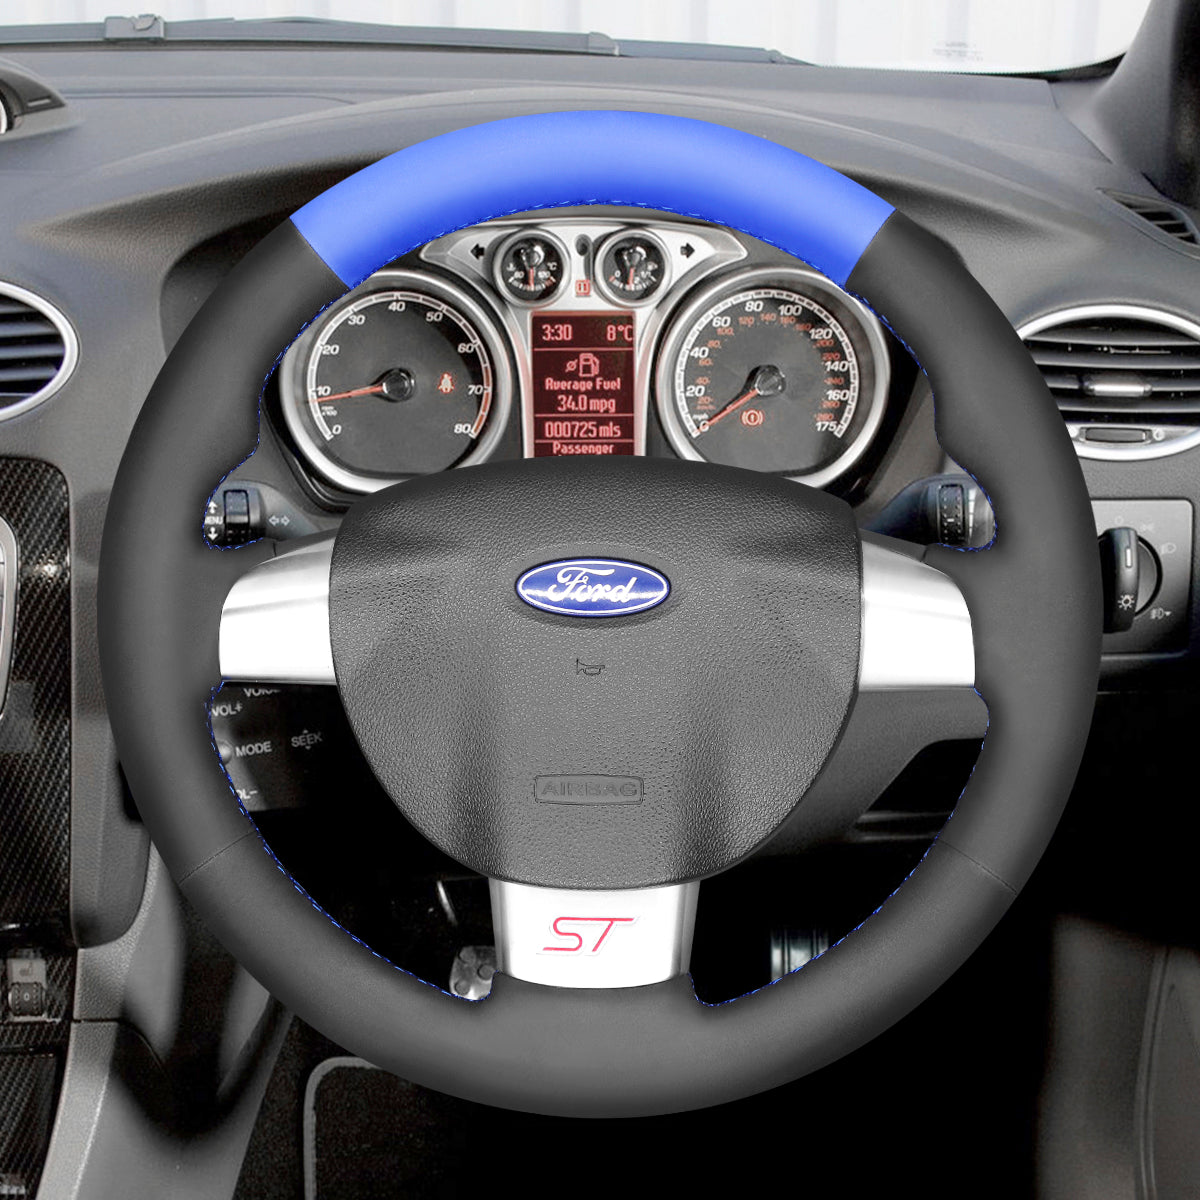 MEWANT Hand Stitch Black Blue Leather Suede Car Steering Wheel Cover for Ford Focus ST 2005-2012 / Focus RS 2009-2011